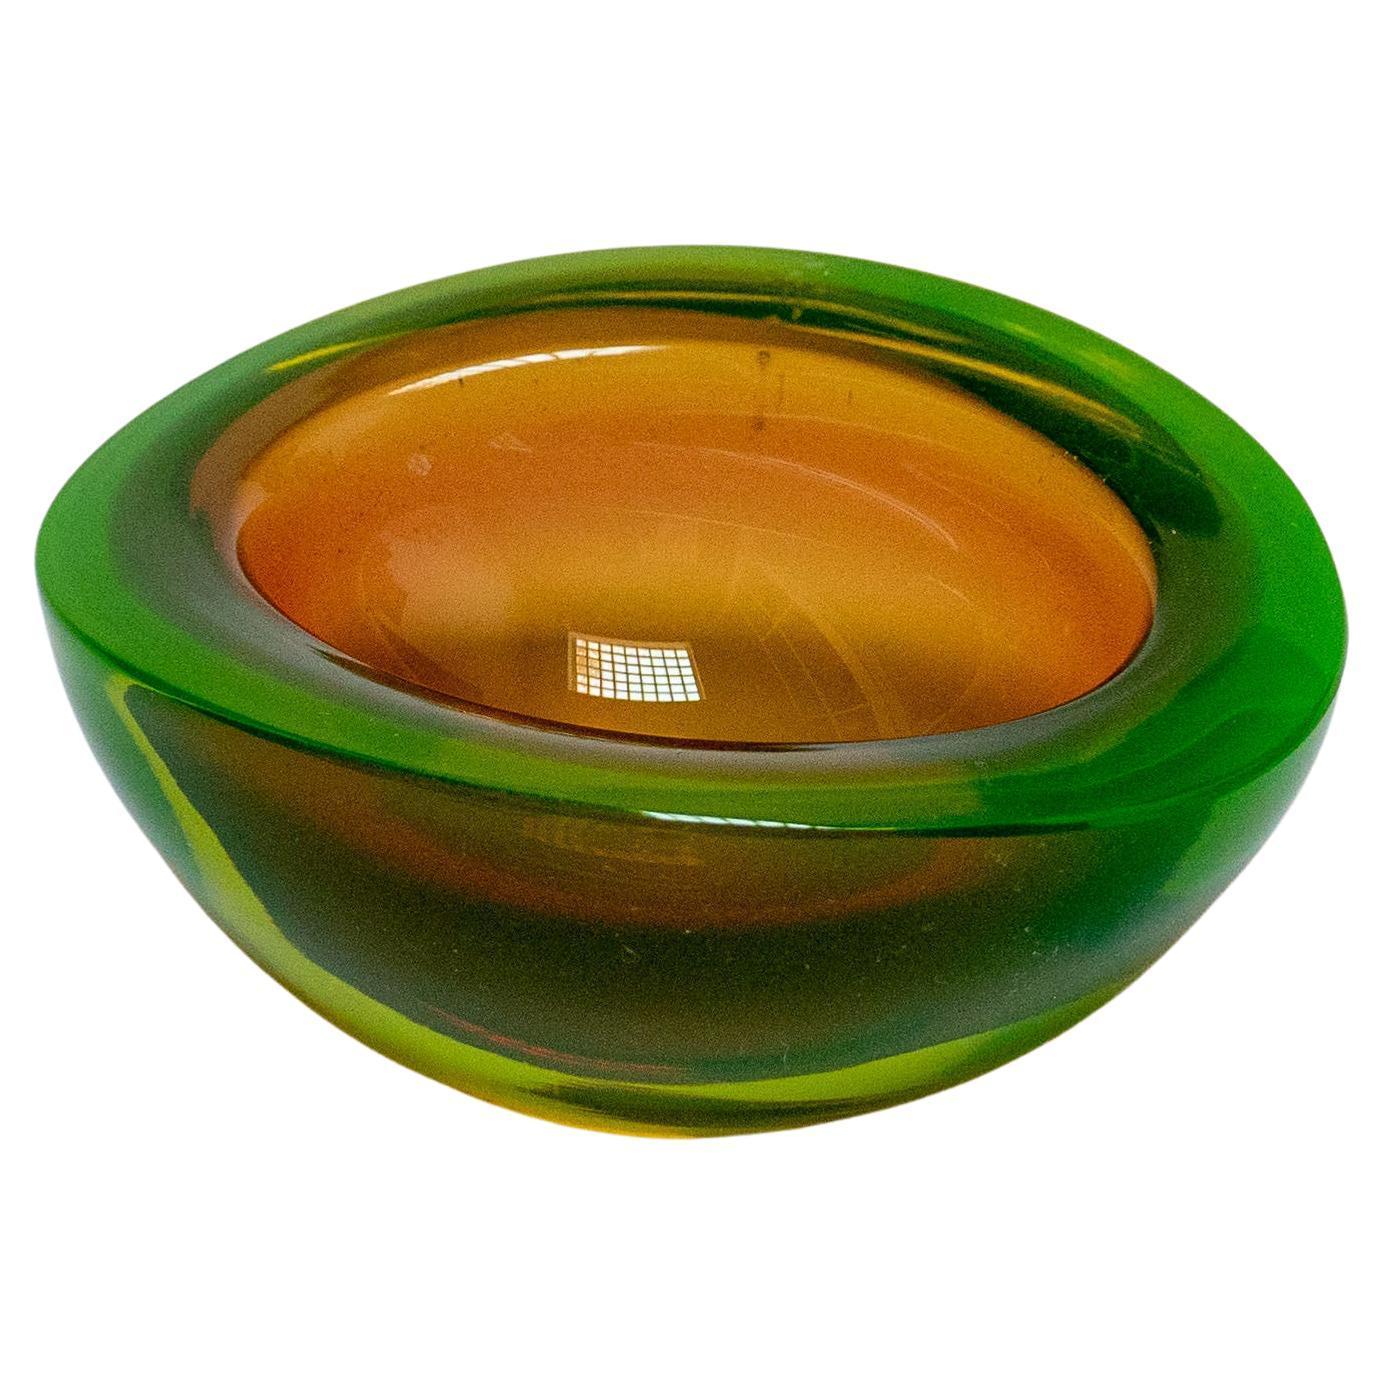 Vintage Mid Century Murano Glass Bowl in Matte Green with Orange Accents For Sale